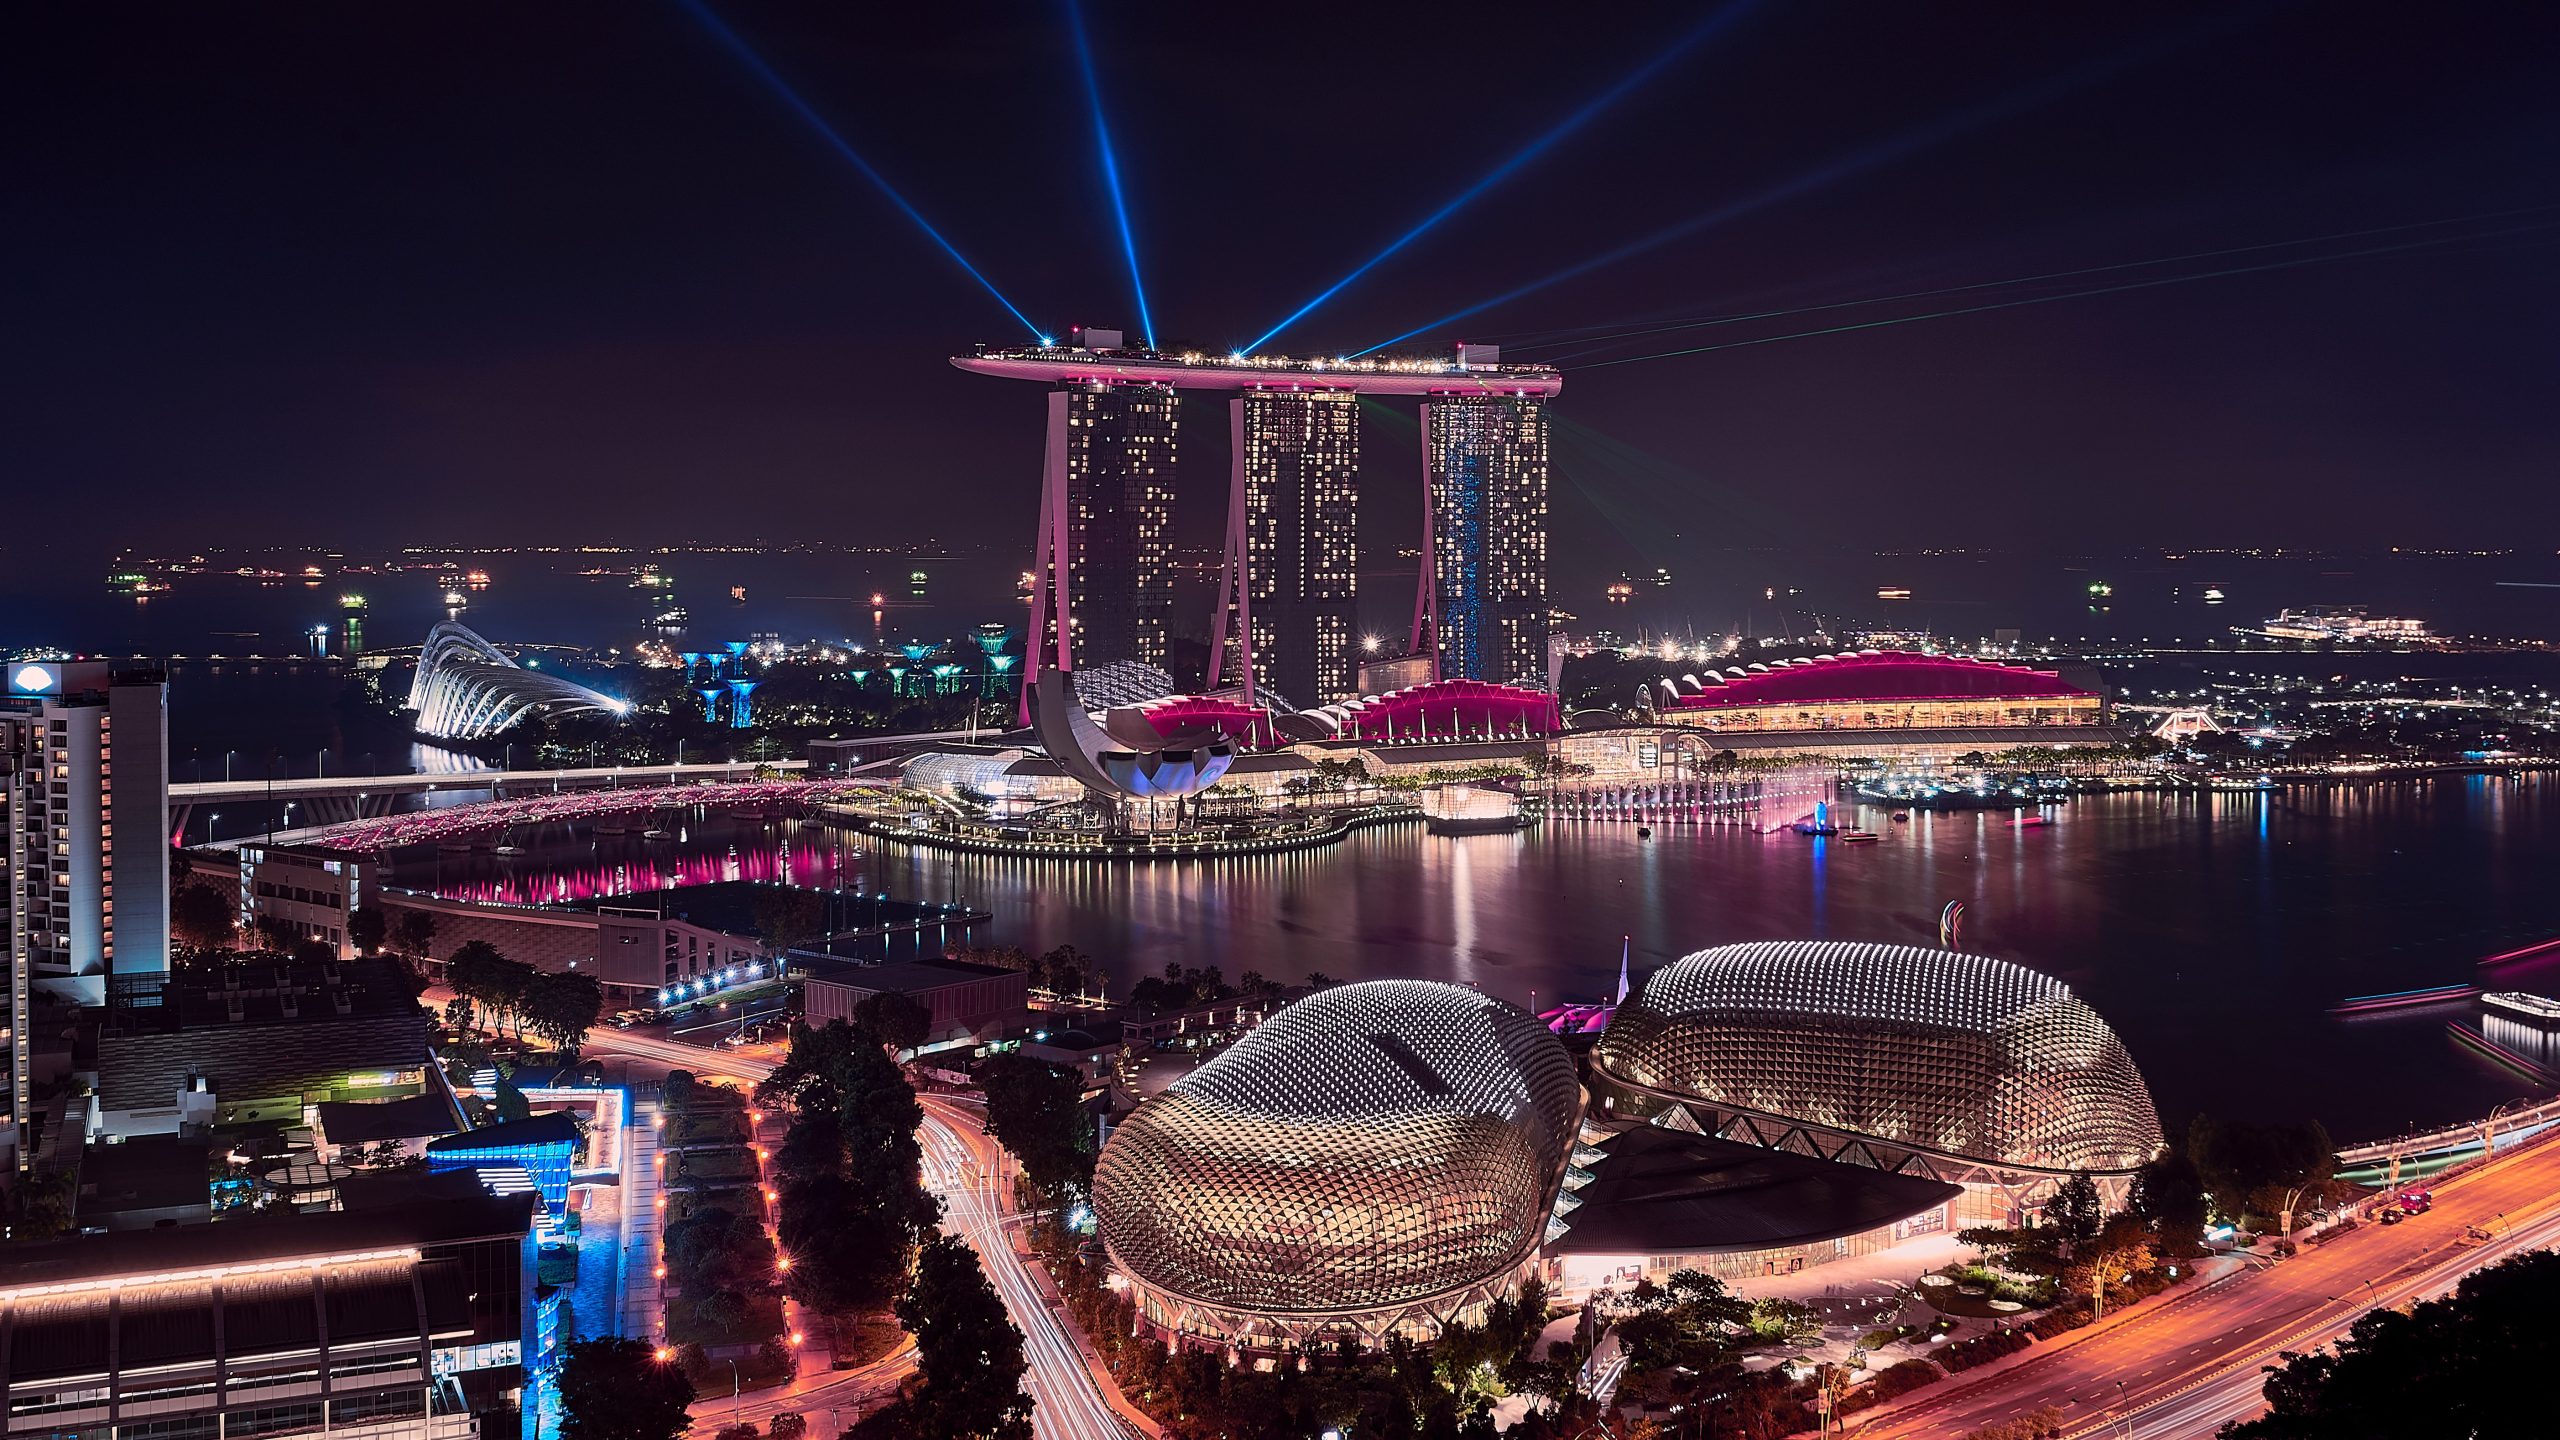 WebBeds Reveals “The Expert’s Route to Singapore” with Major Travel Trade Webinar